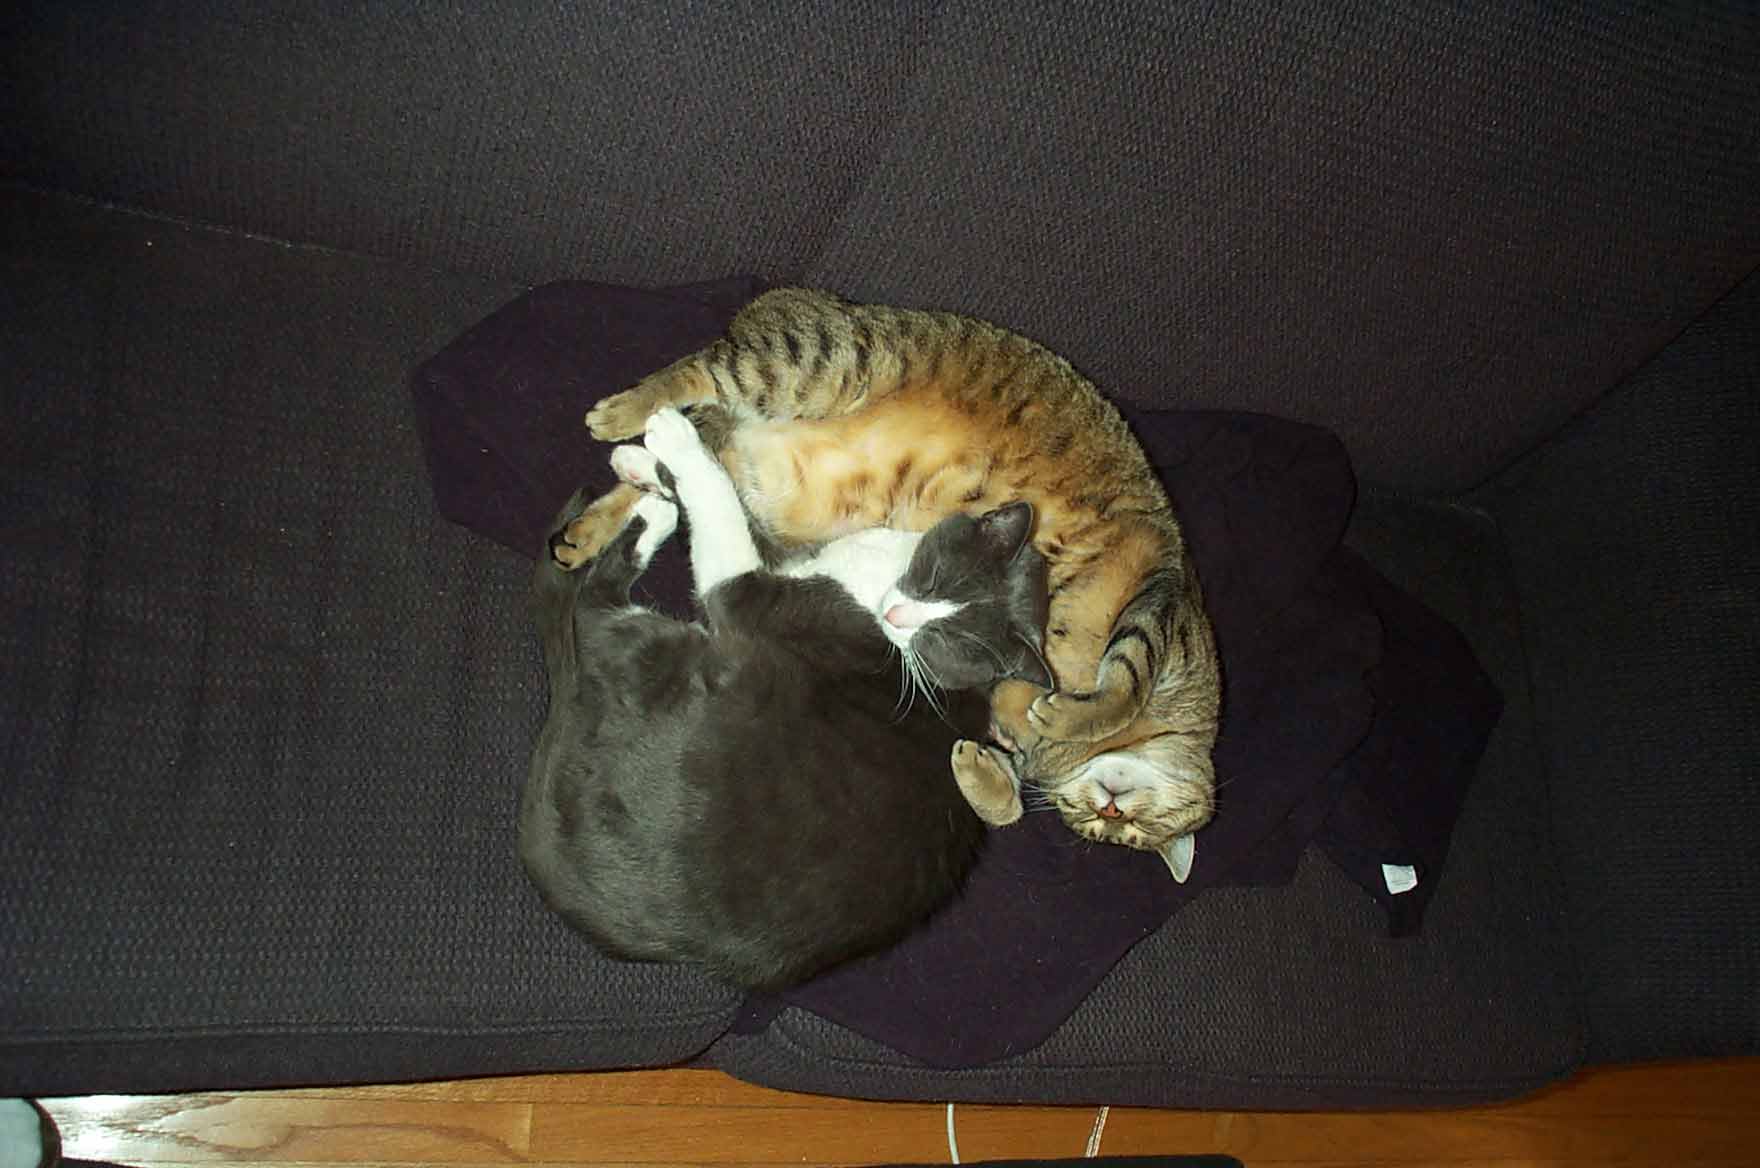 Two sleeping cats